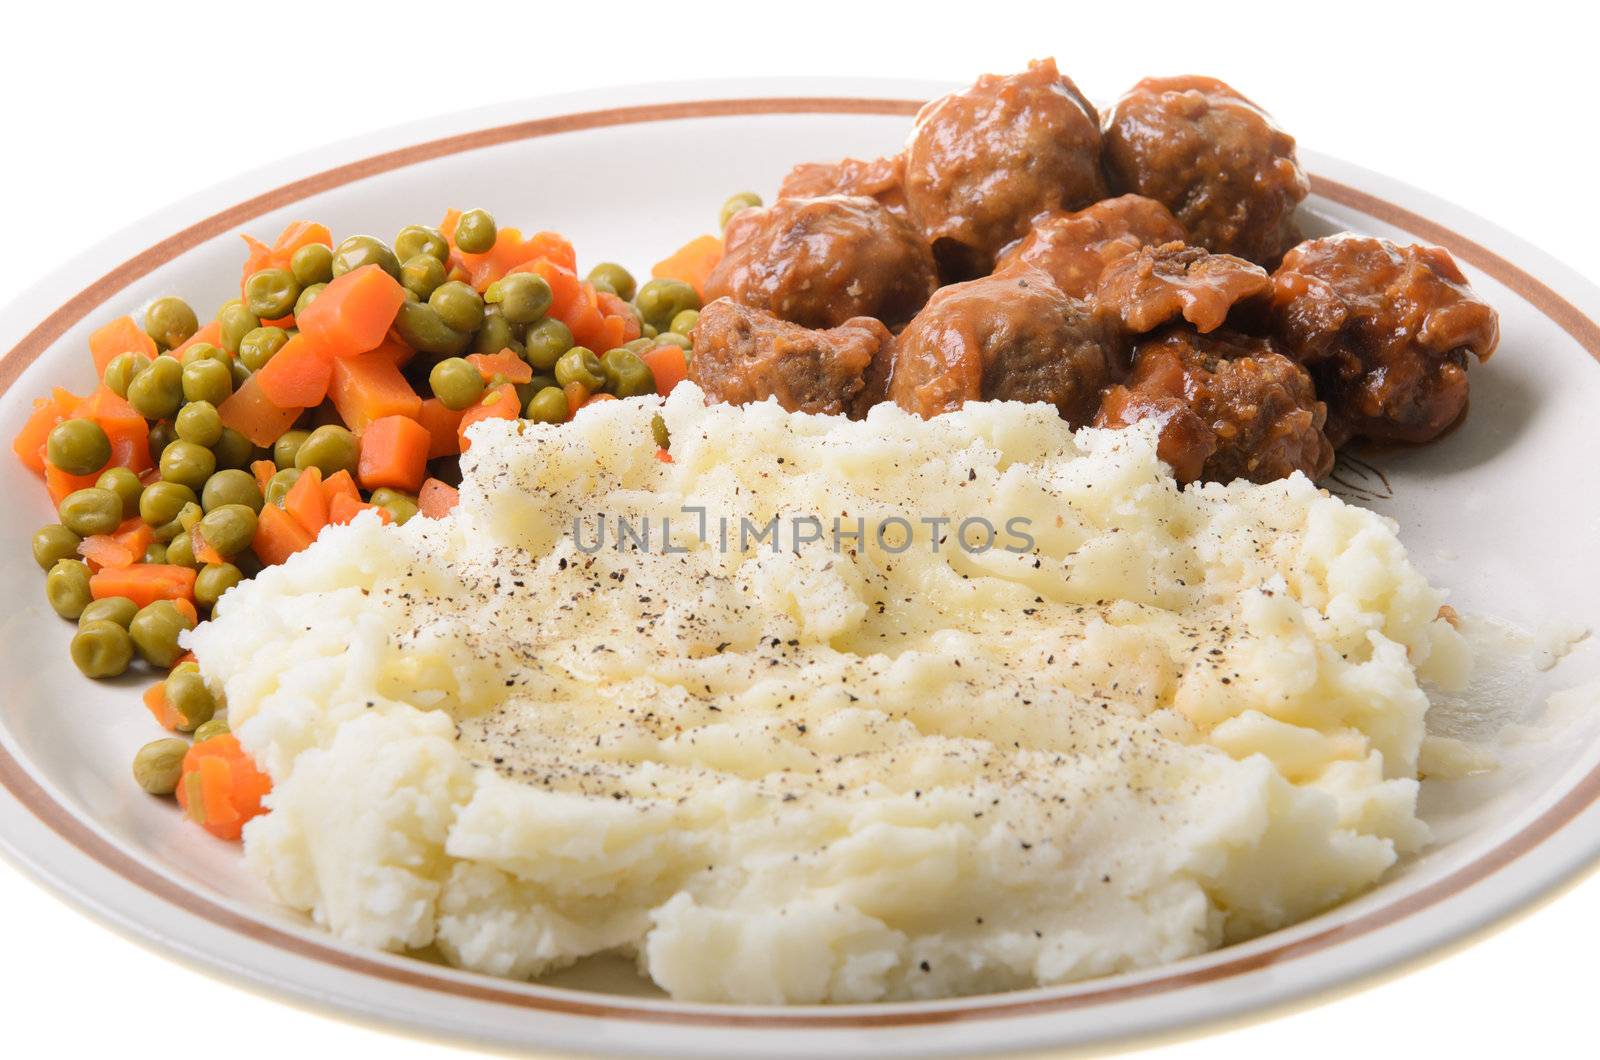 An american supper of mashed potatoes, with sweet and sour meatballs with peas and carrots.